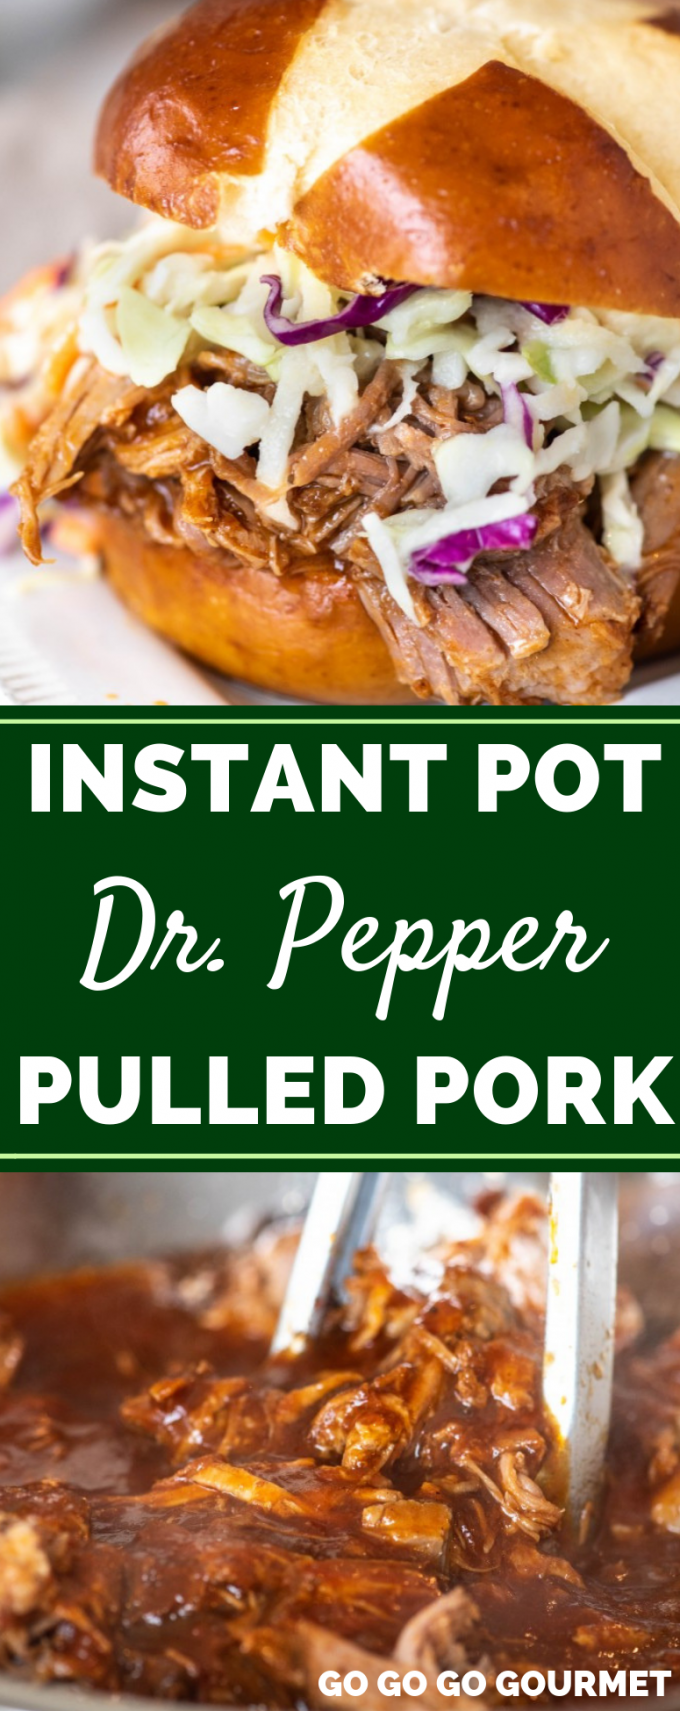 This Instant Pot Pulled Pork recipe is SO easy, you won't believe it! With a sweet and tangy BBQ sauce made with Dr. Pepper, it's totally mouth watering. Pressure cooking a pork shoulder has never been so easy! #gogogogourmet #instantpotdrpepperpulledpork #instantpotpulledpork #easyinstantpotrecipes via @gogogogourmet